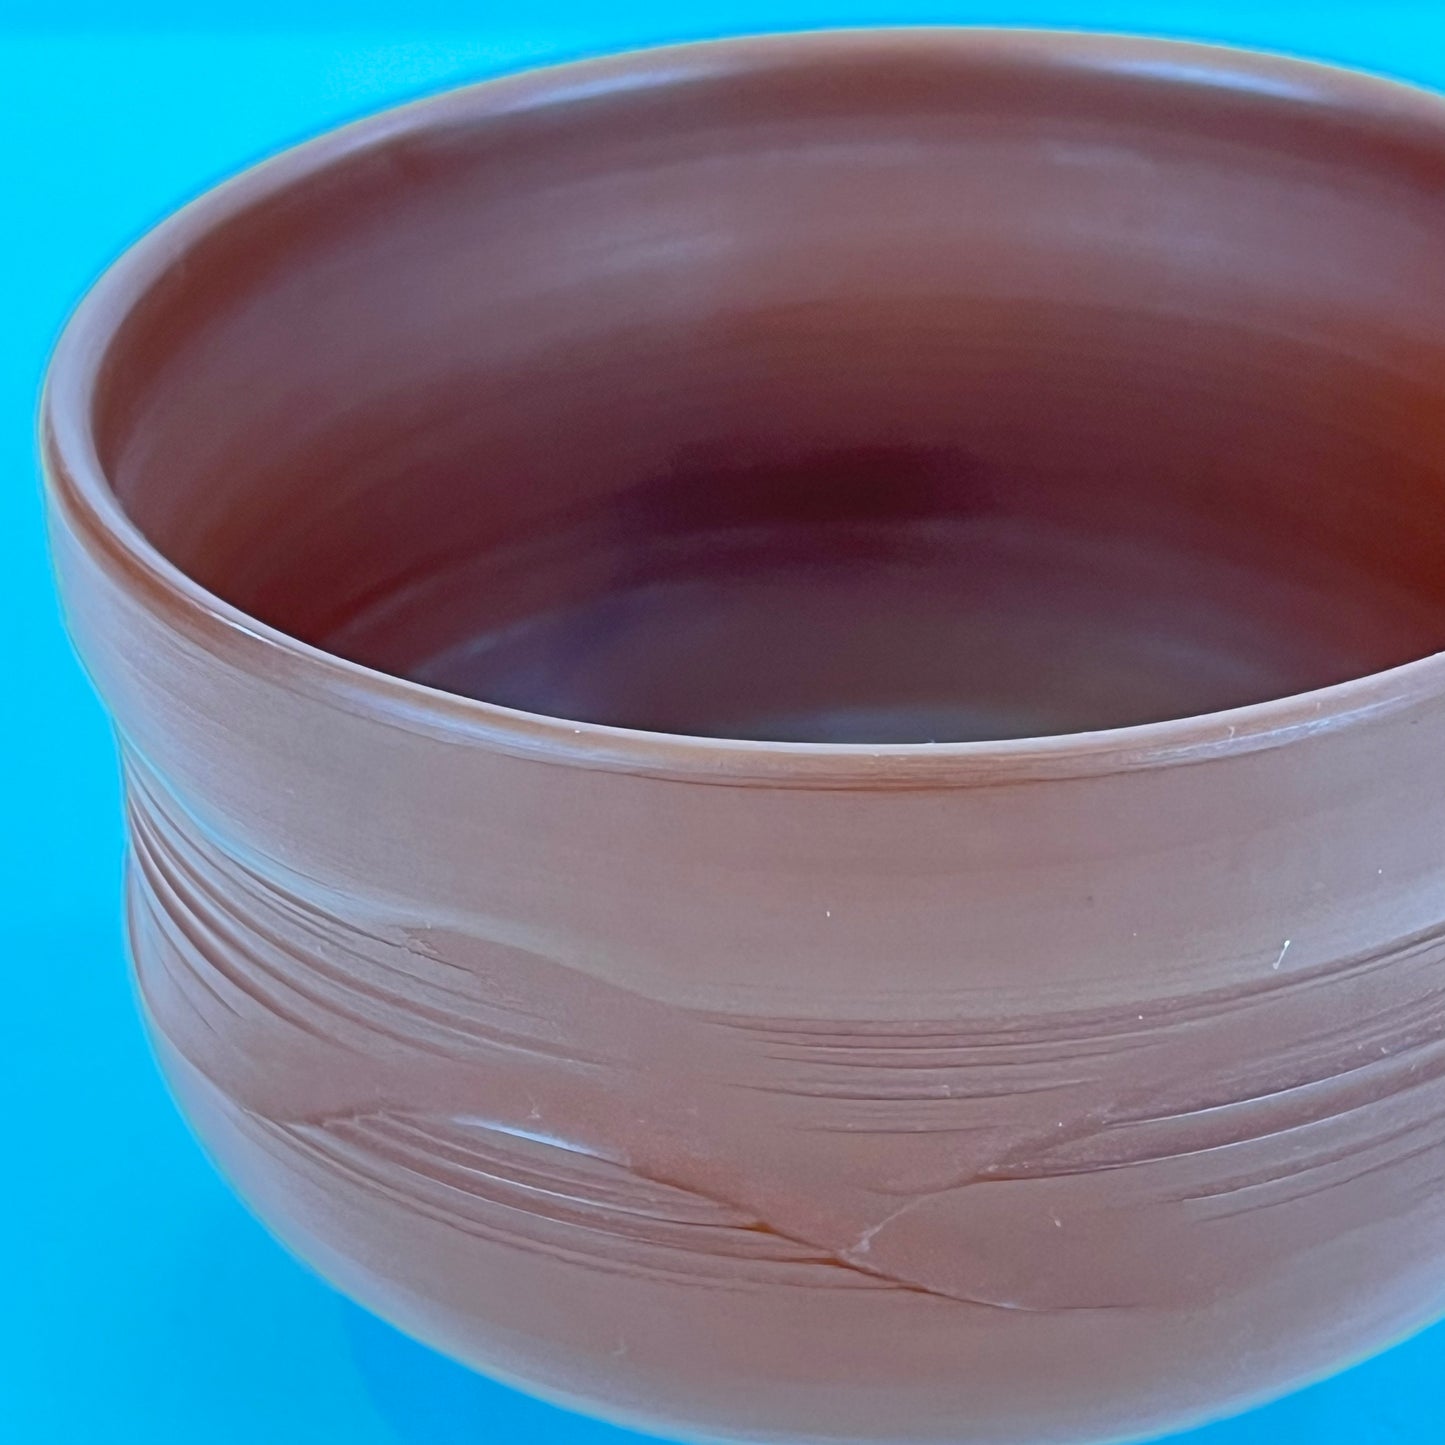 Signed Tea Ceremony Chawan Tea Bowl Red Earthenware Clay Unglazed 4.5”D